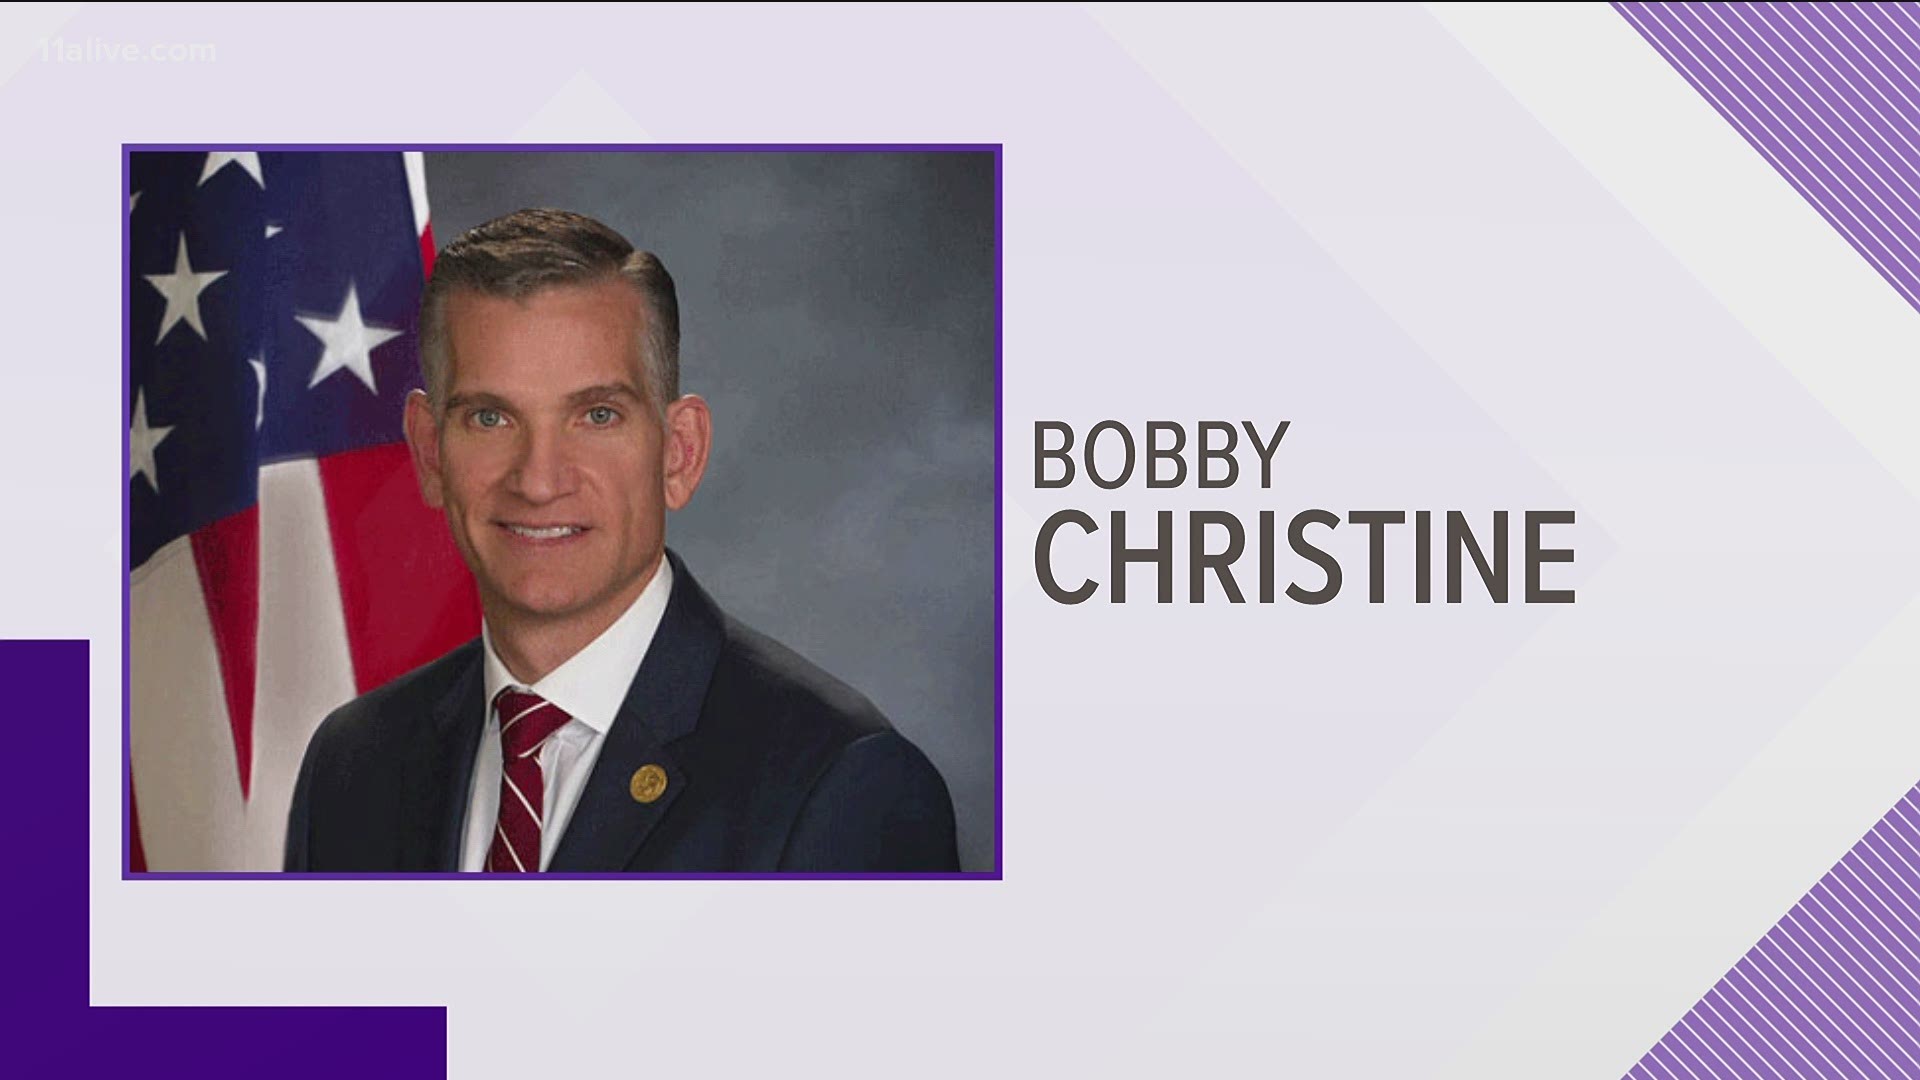 President Trump appointed Bobby Christine to the position after BJ Pak resigned abruptly. Christine has also now resigned.